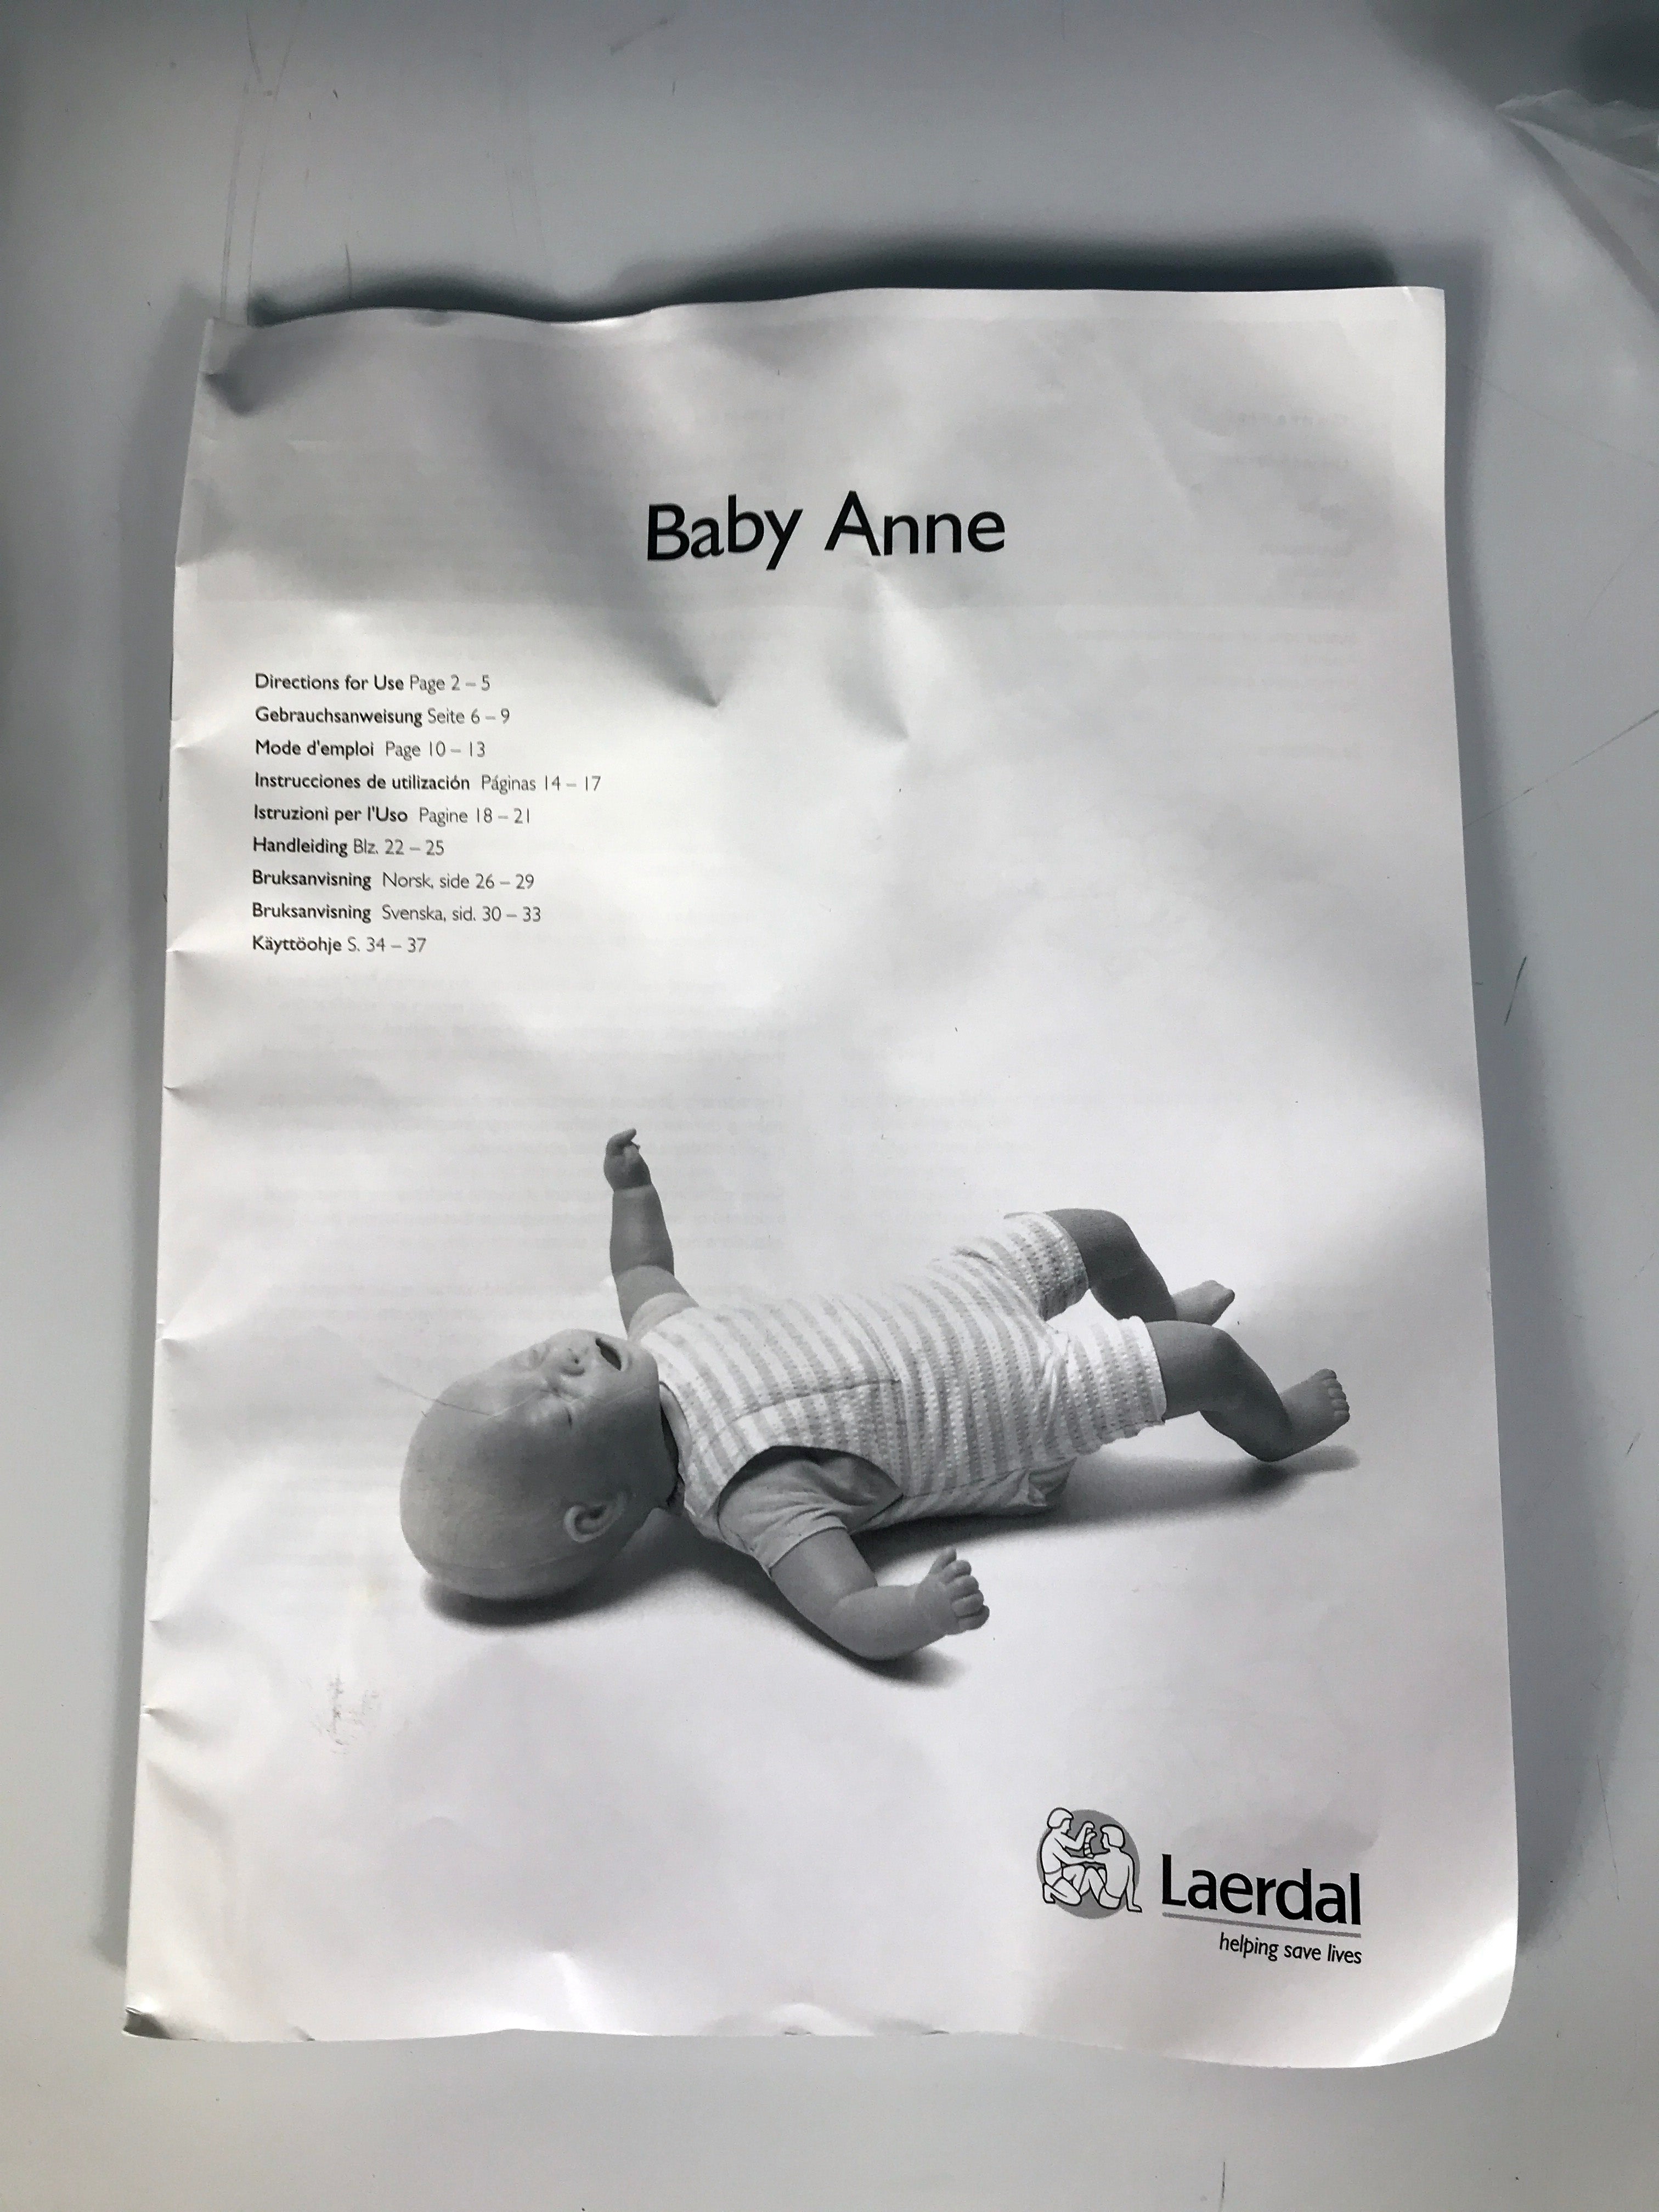 4 Laerdal Baby Anne Infant CPR Training Manikins with Bag and Extras